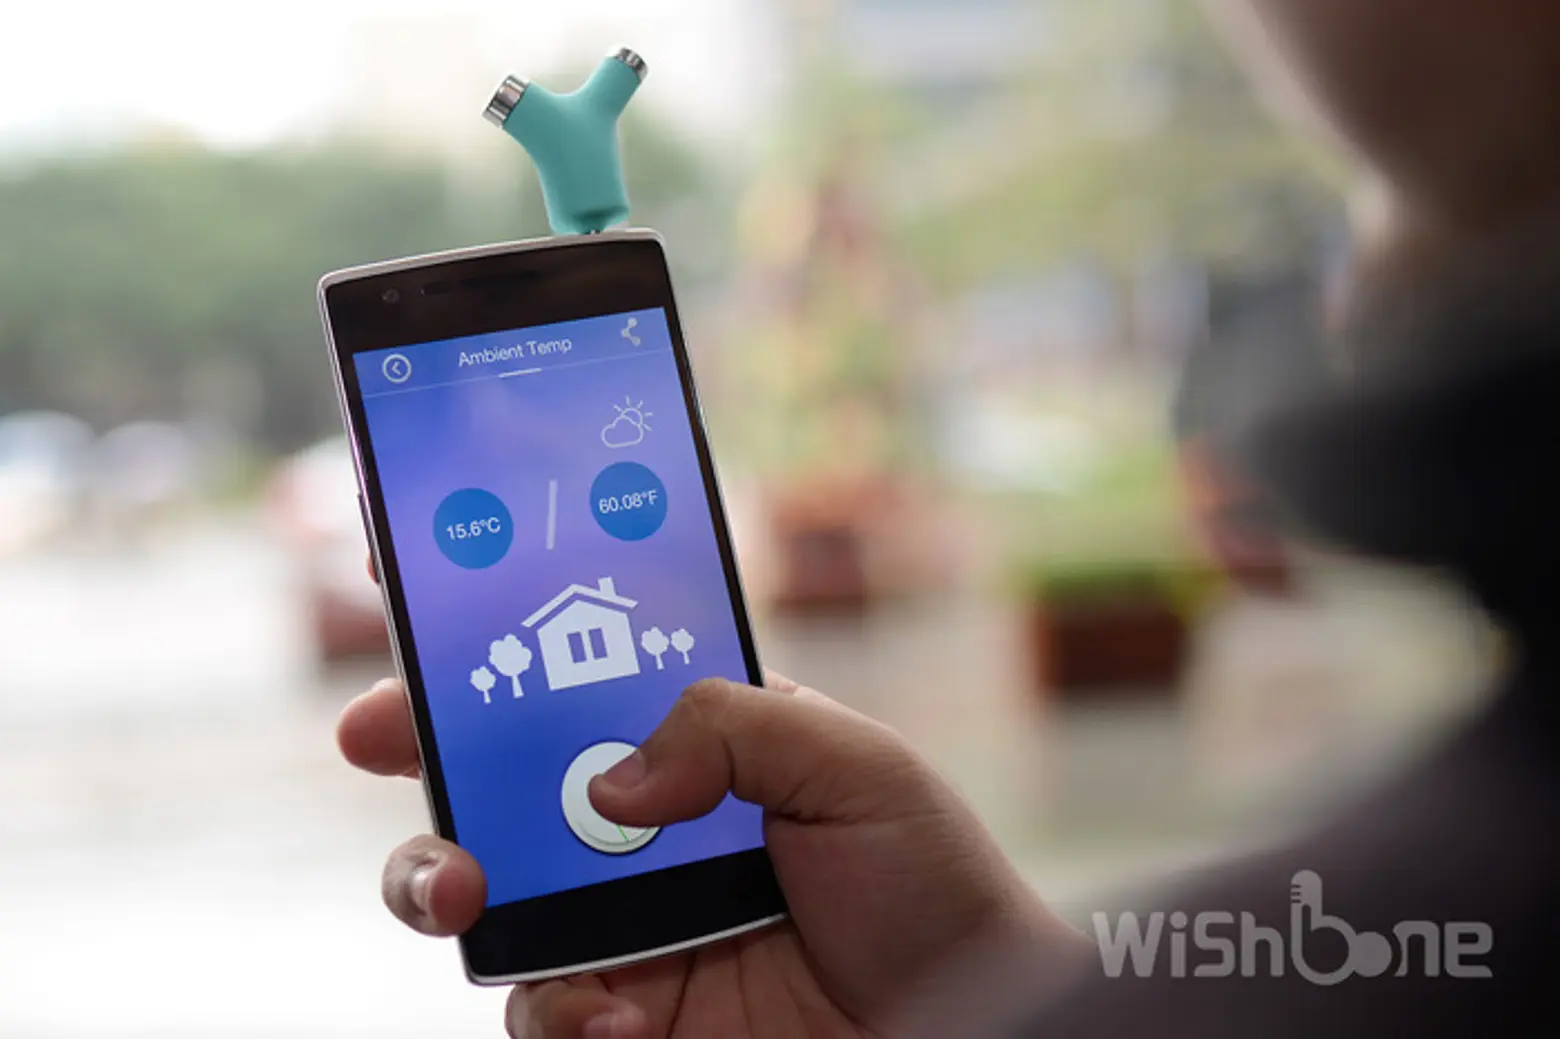 Wishbone: The World’s Smallest Smart Thermometer Checks Body, Object, and Environment Temperature